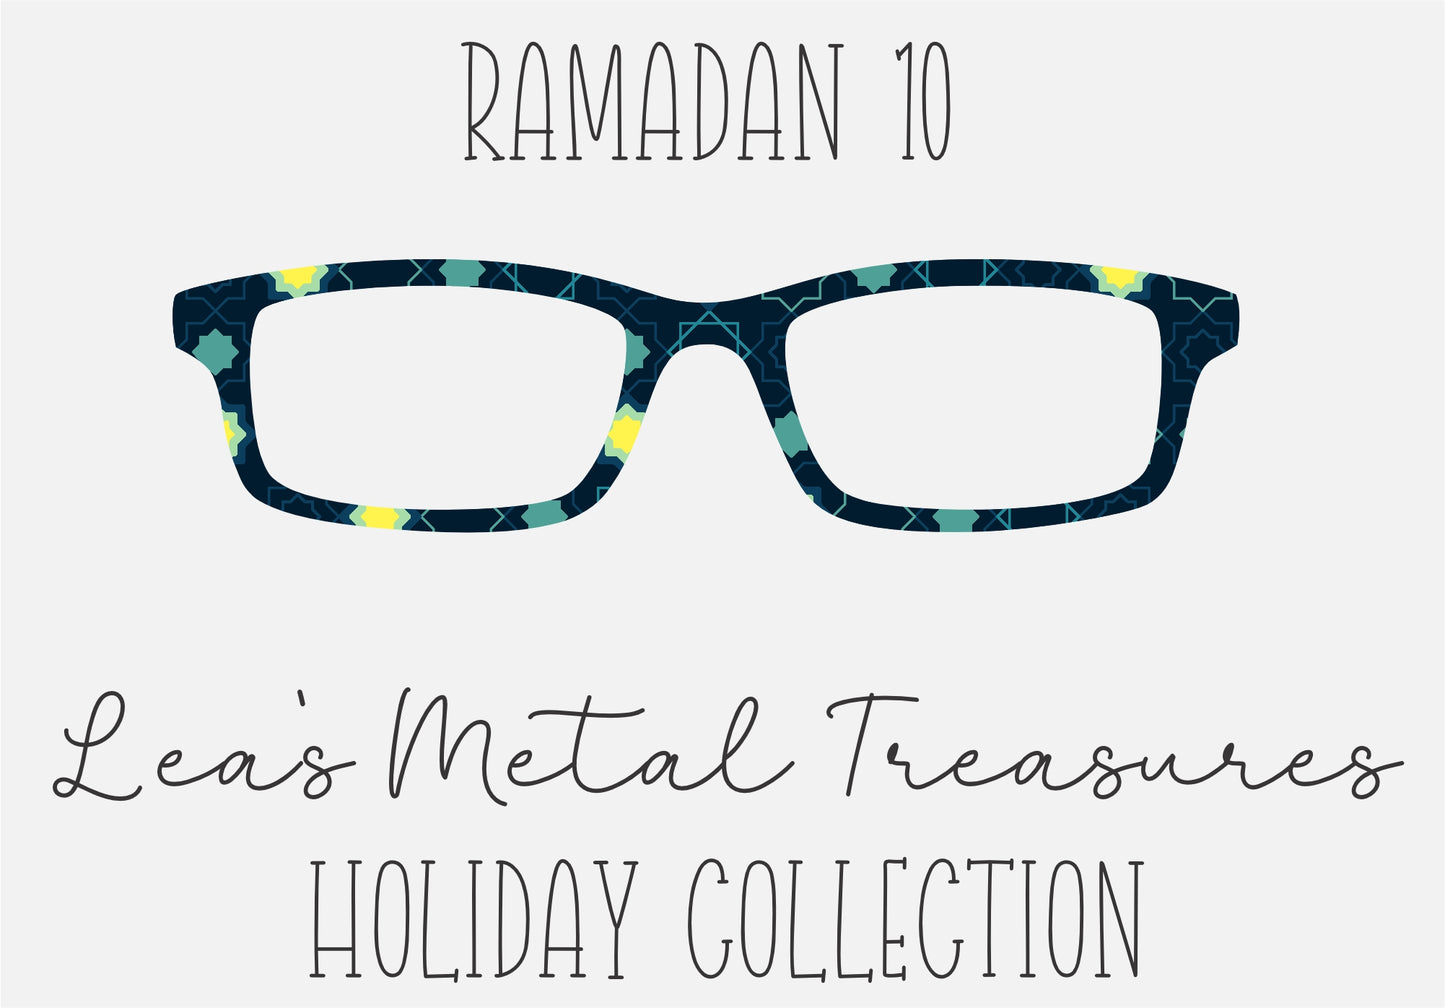 Ramadan 10 Eyewear Frame Toppers COMES WITH MAGNETS